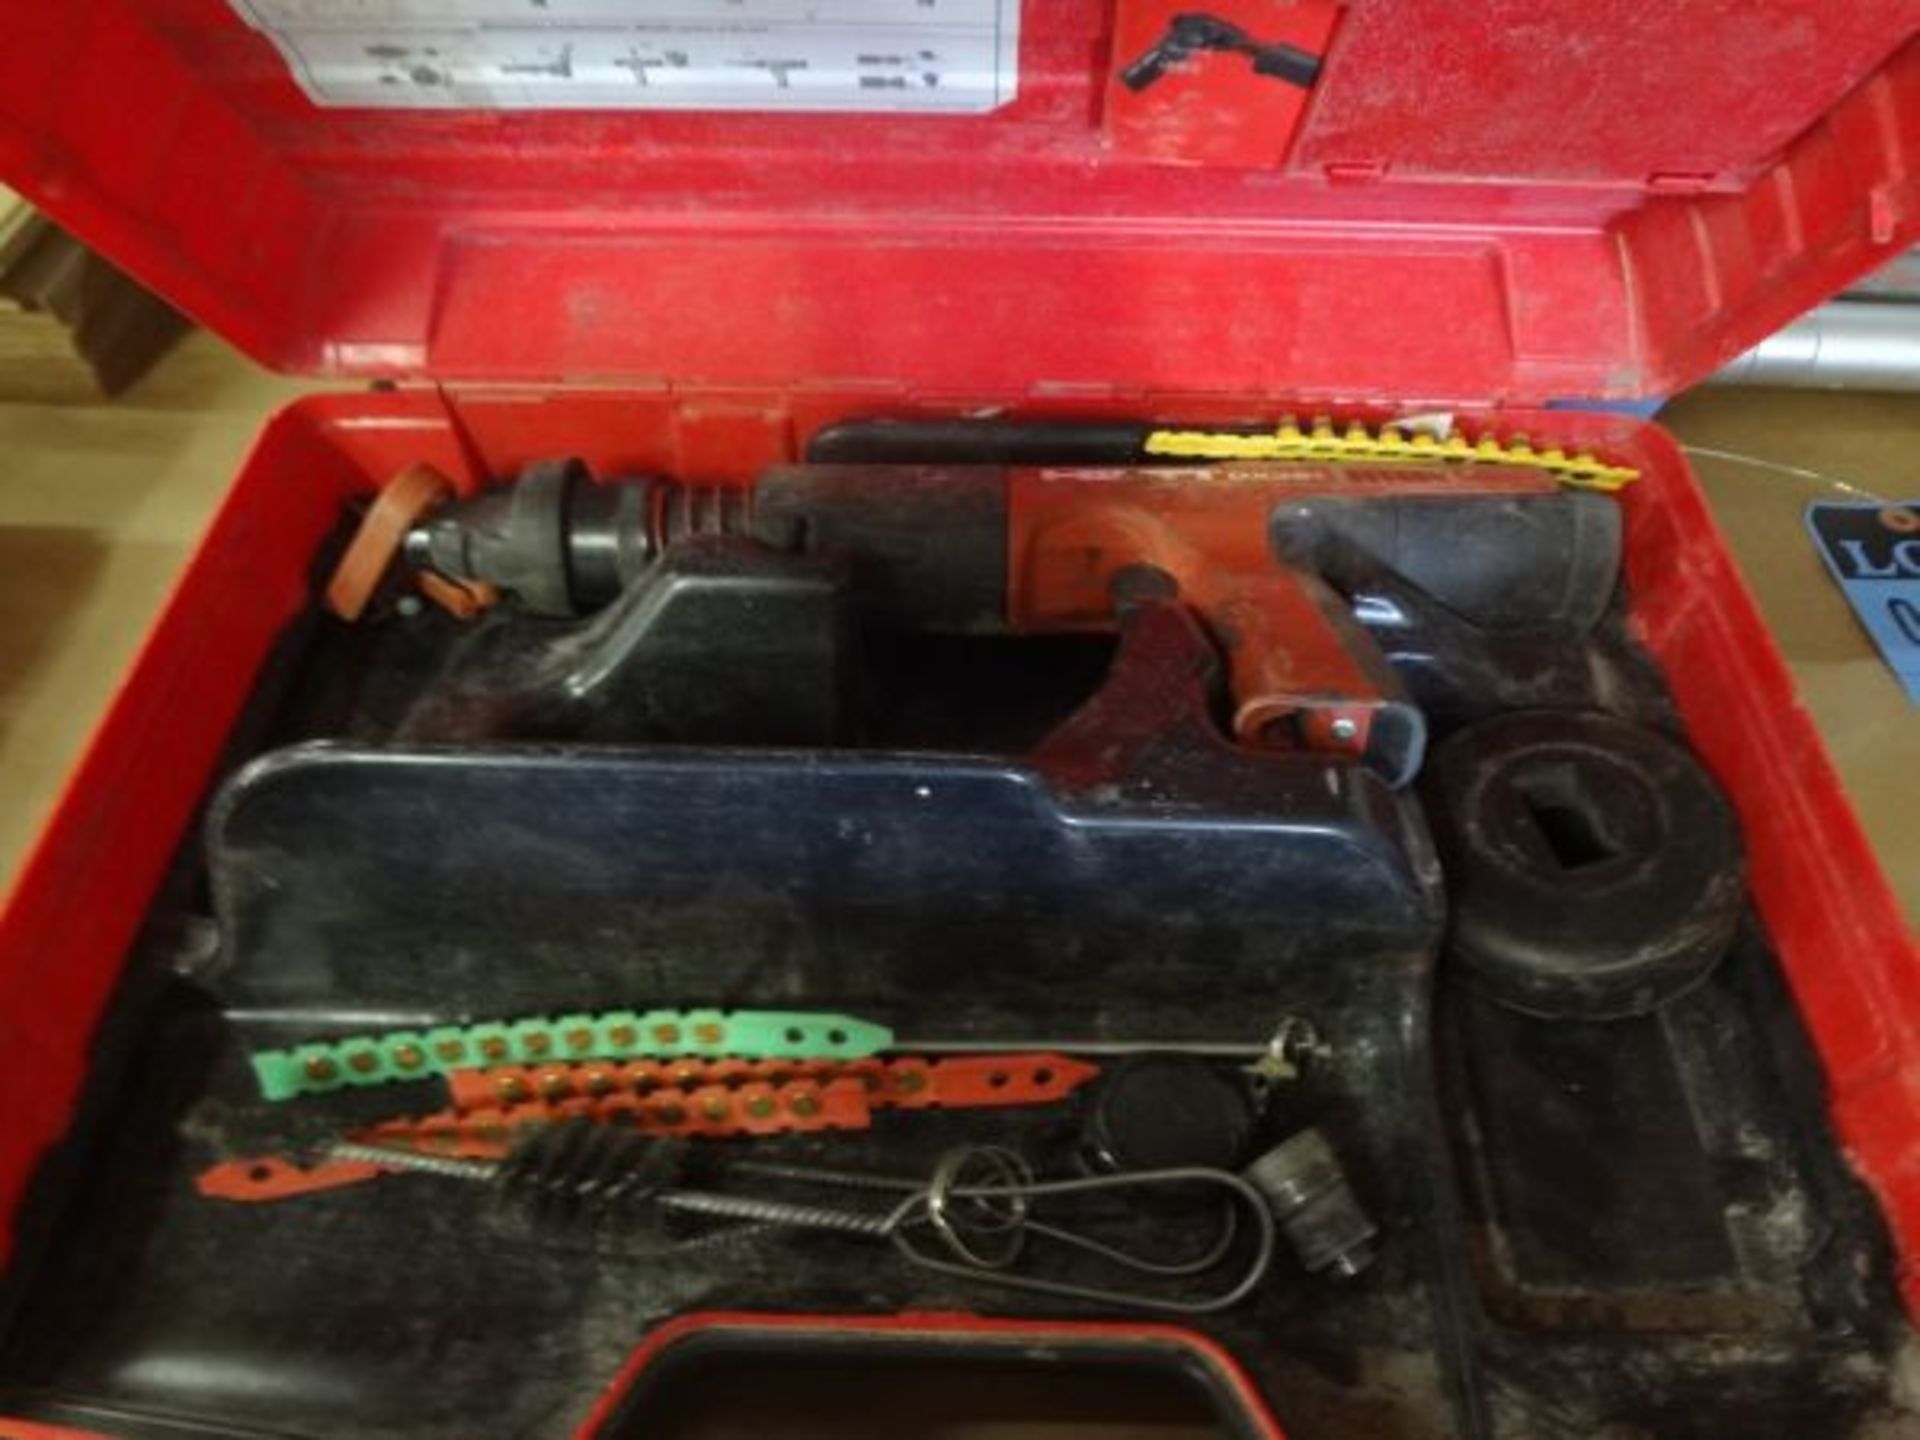 HILTI MODEL DX351 POWDER ACTUATED TOOL